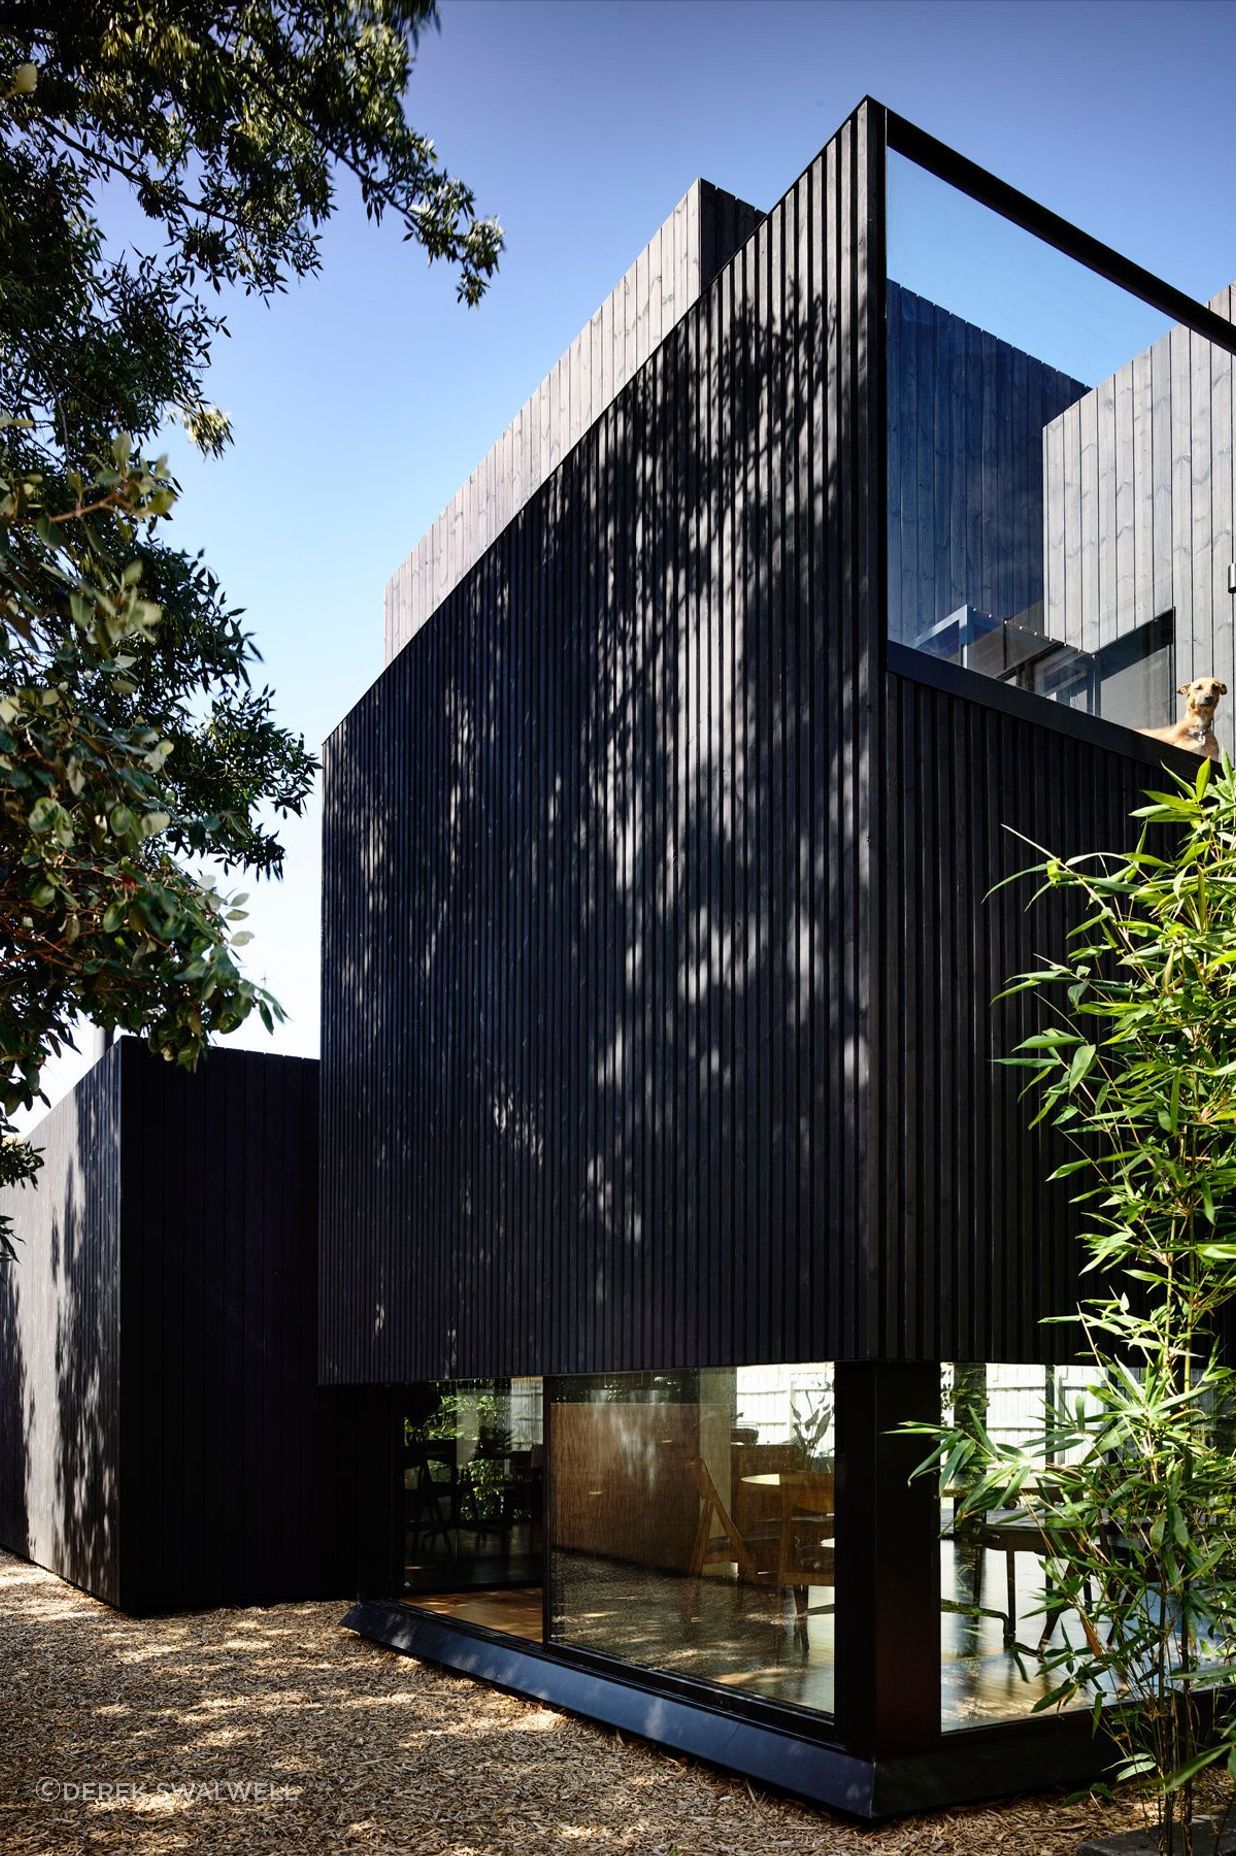 Large windows soften the charred timber cladding.